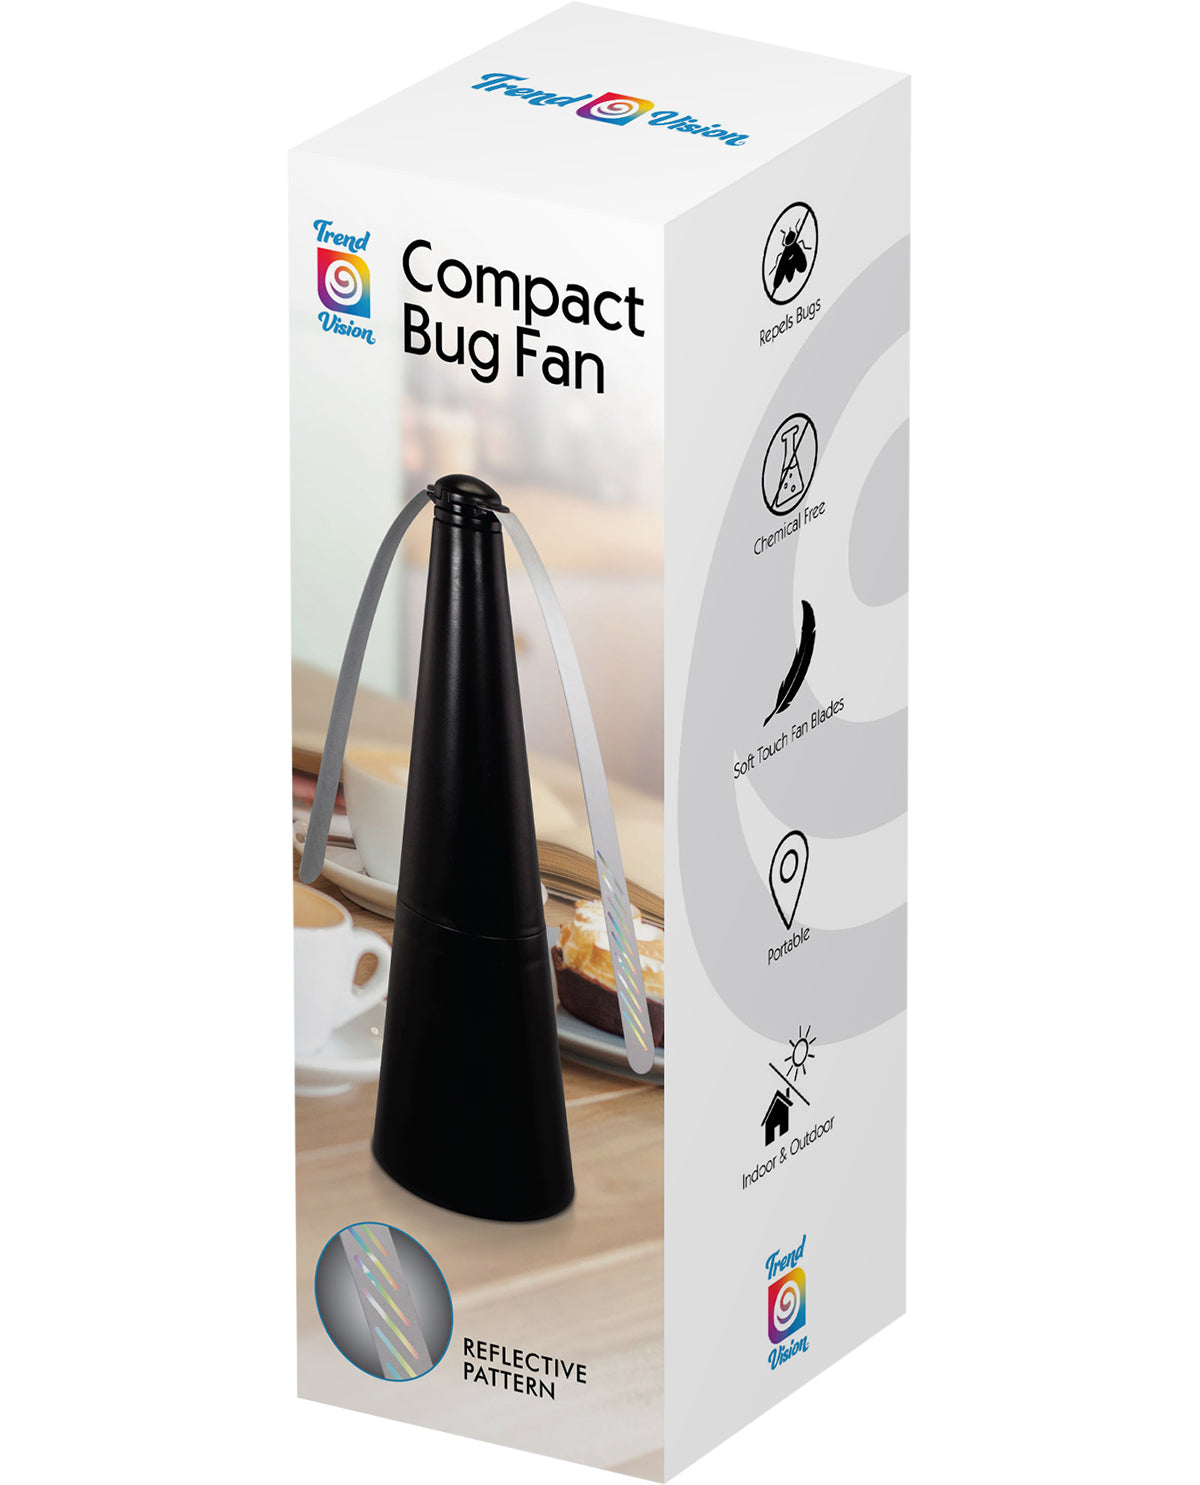 Chemical Free Fly and Insect Deterrent Fan